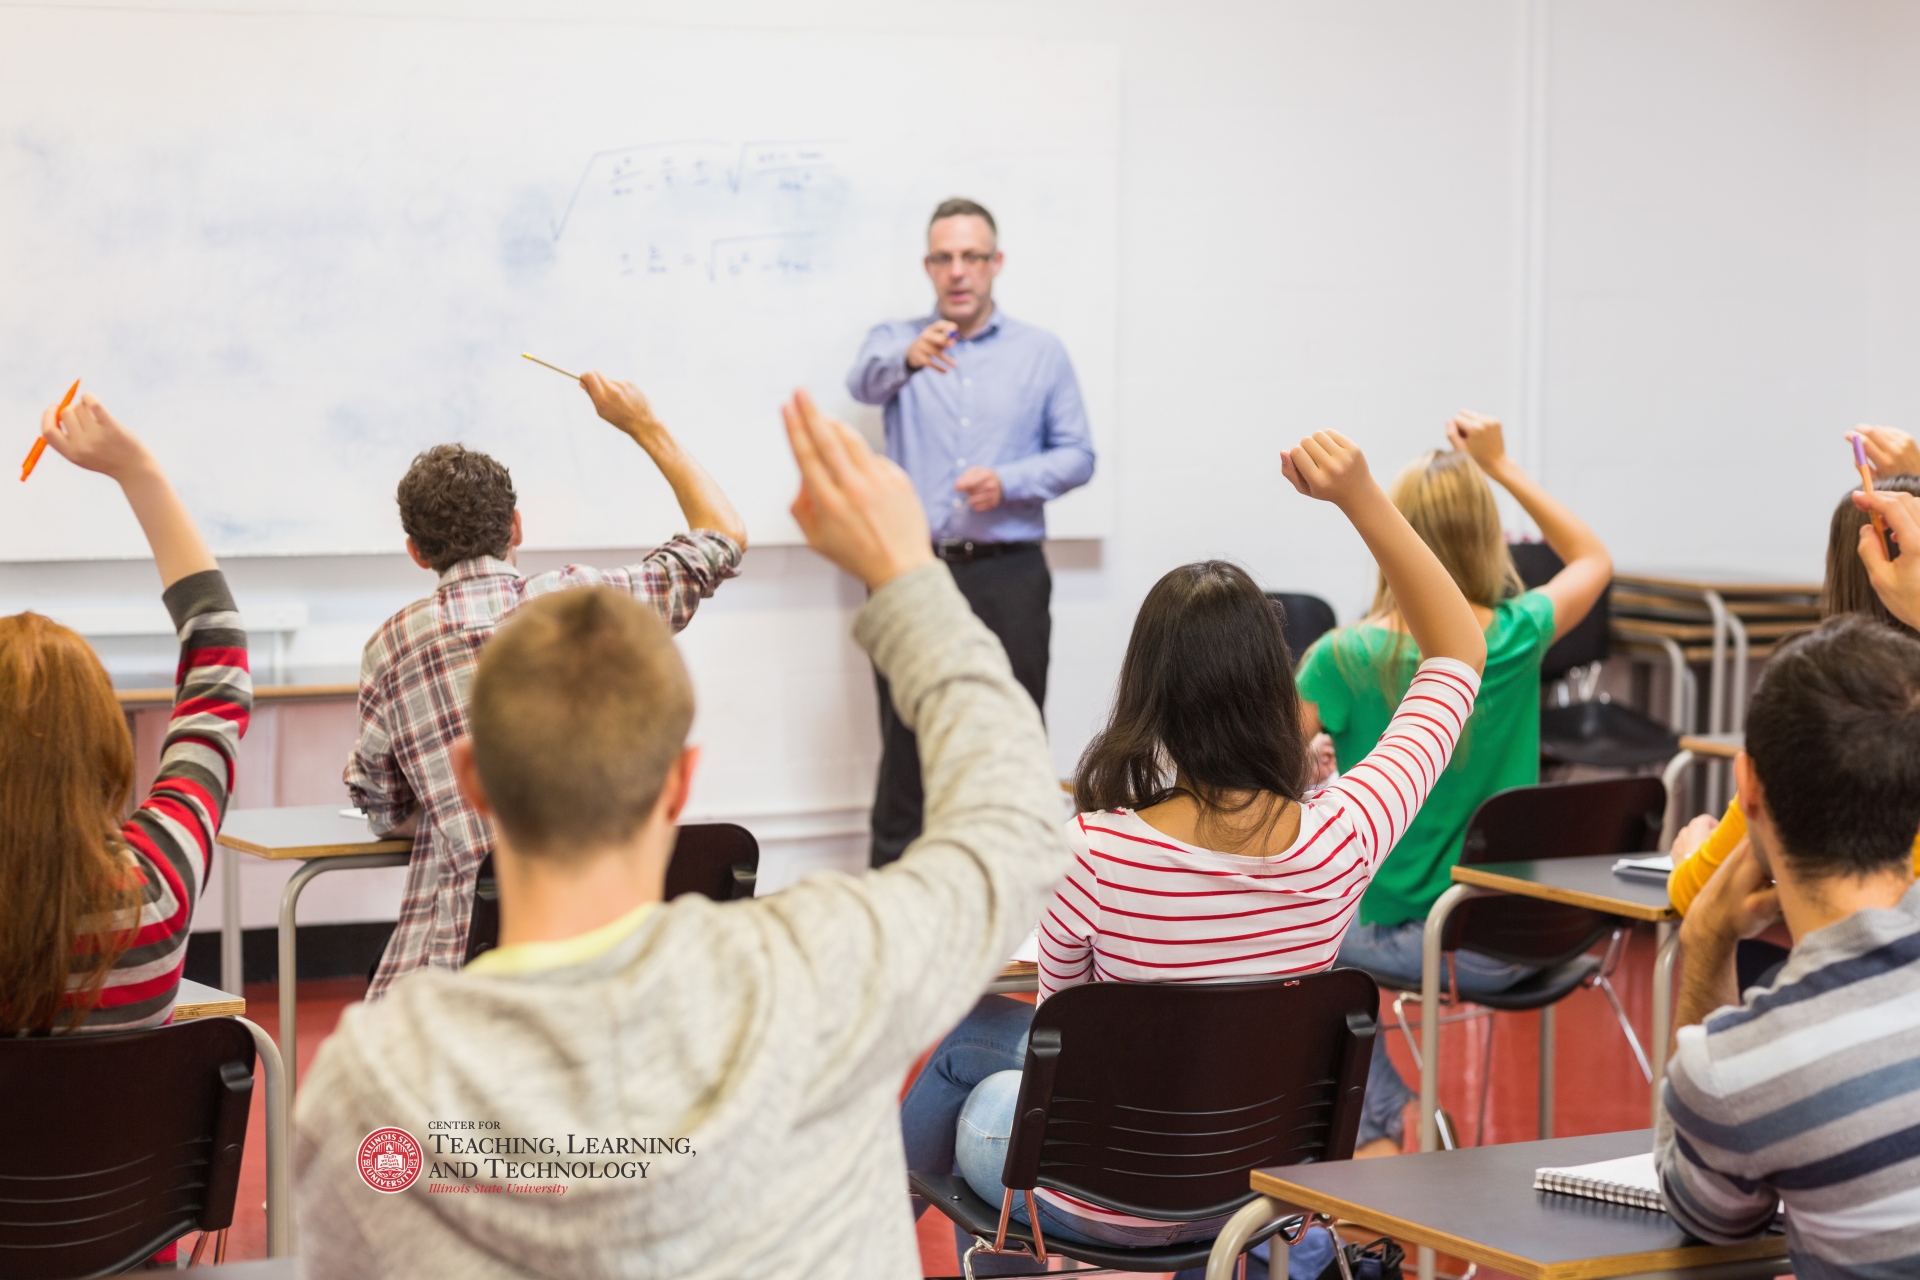 Teacher in front of class, student with raised hands